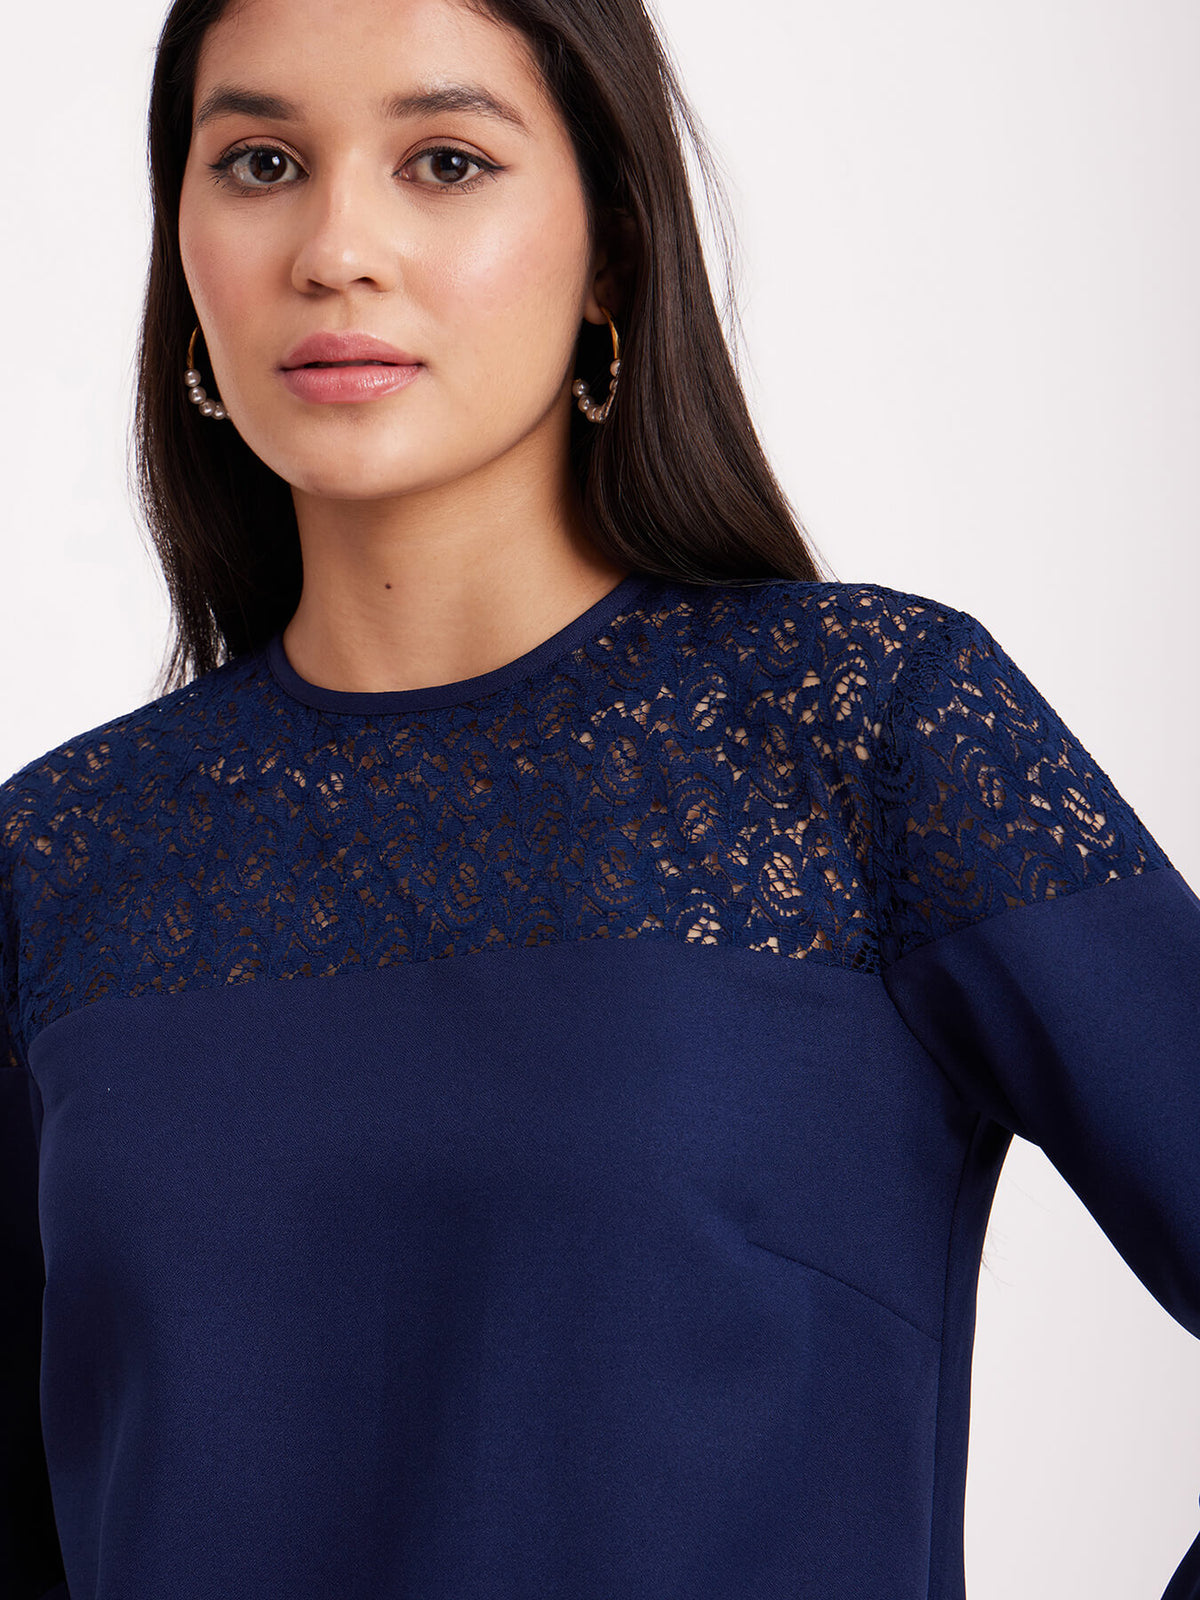 Full Sleeves Lace Top - Navy Blue